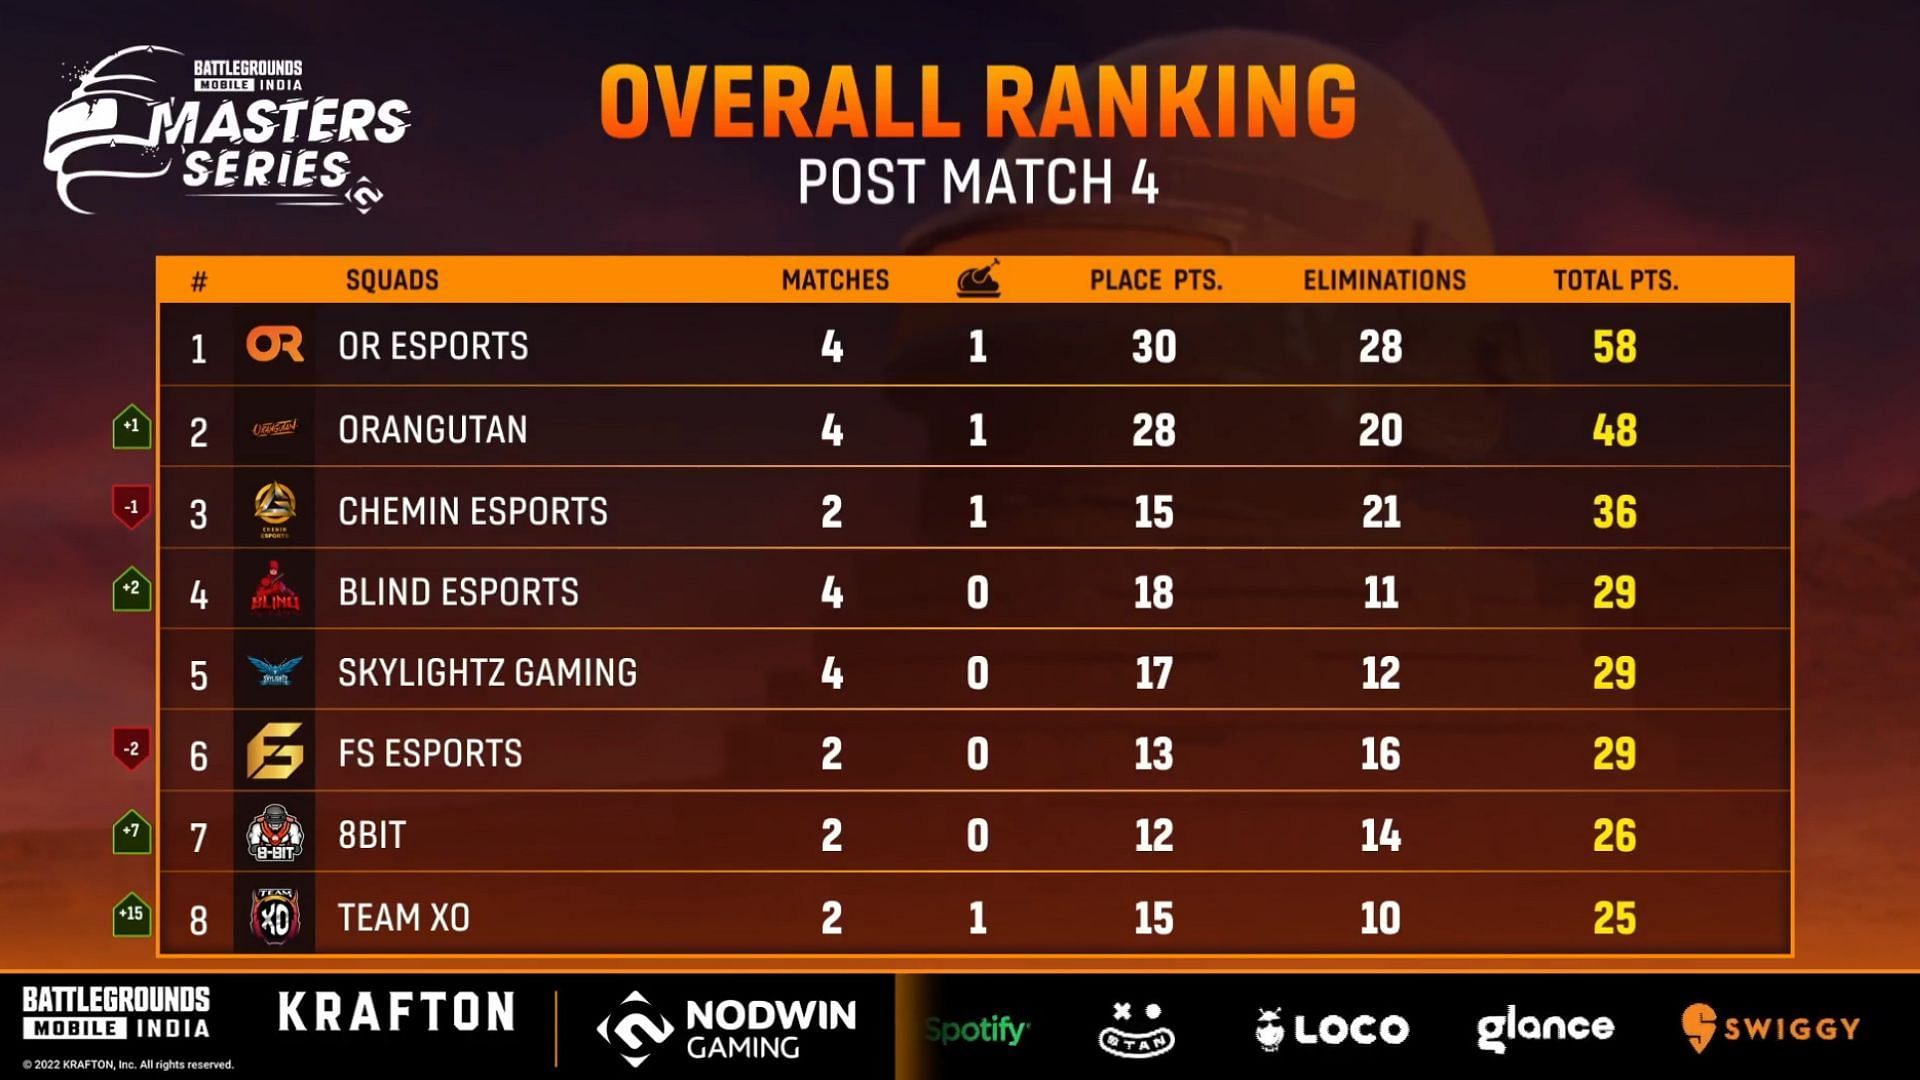 OR Esports finished in first place after BGMI Masters Series Day 1 (Image via Loco)